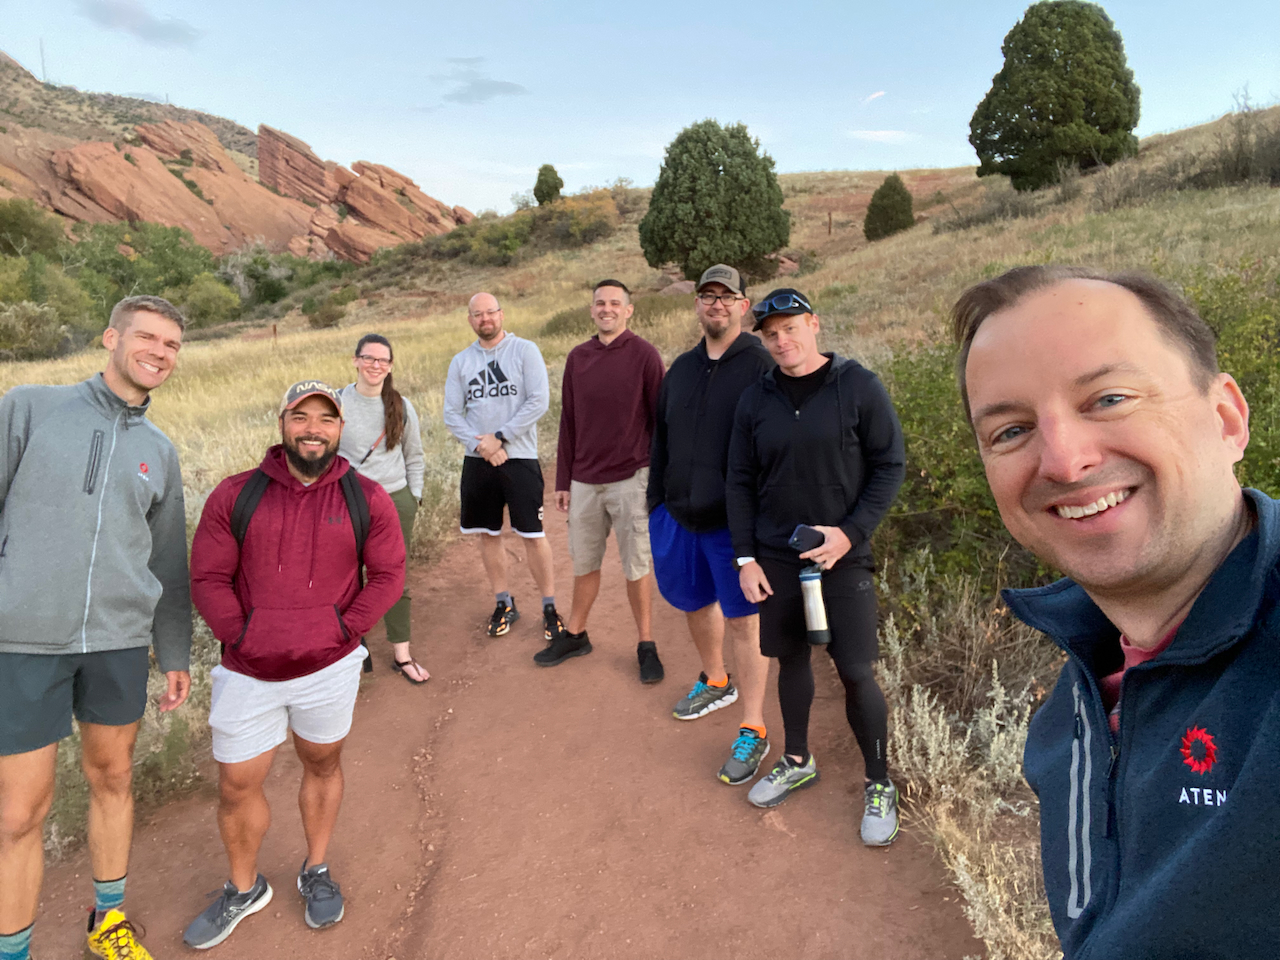 Aten staff on a hike at Red Rocks